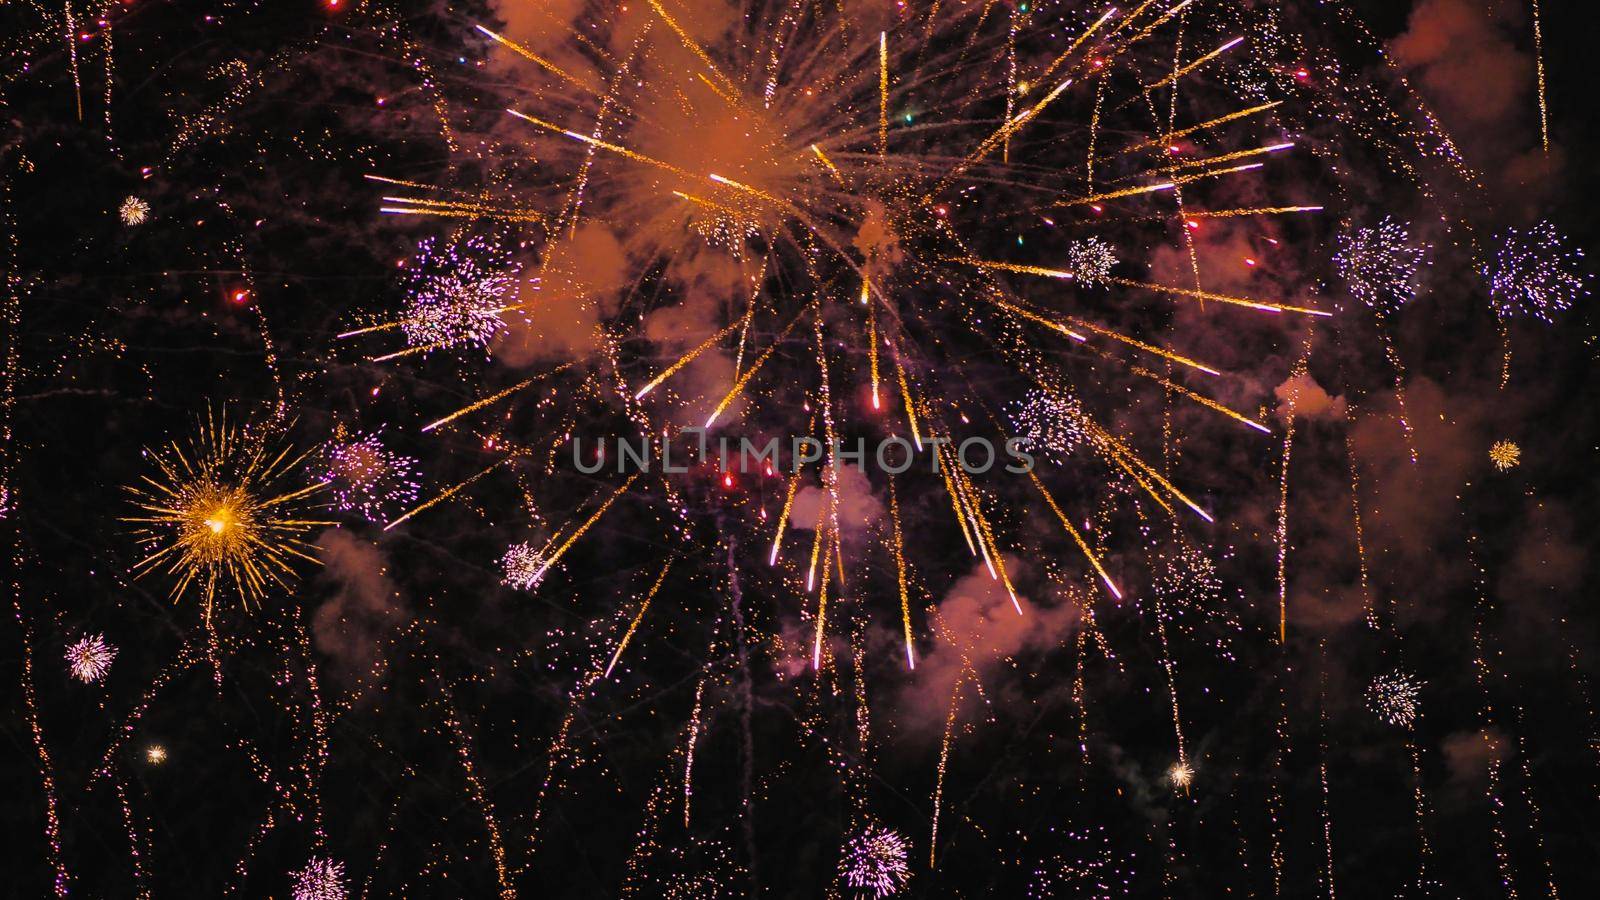 A colourful explosion of fireworks in the night sky. by DovidPro